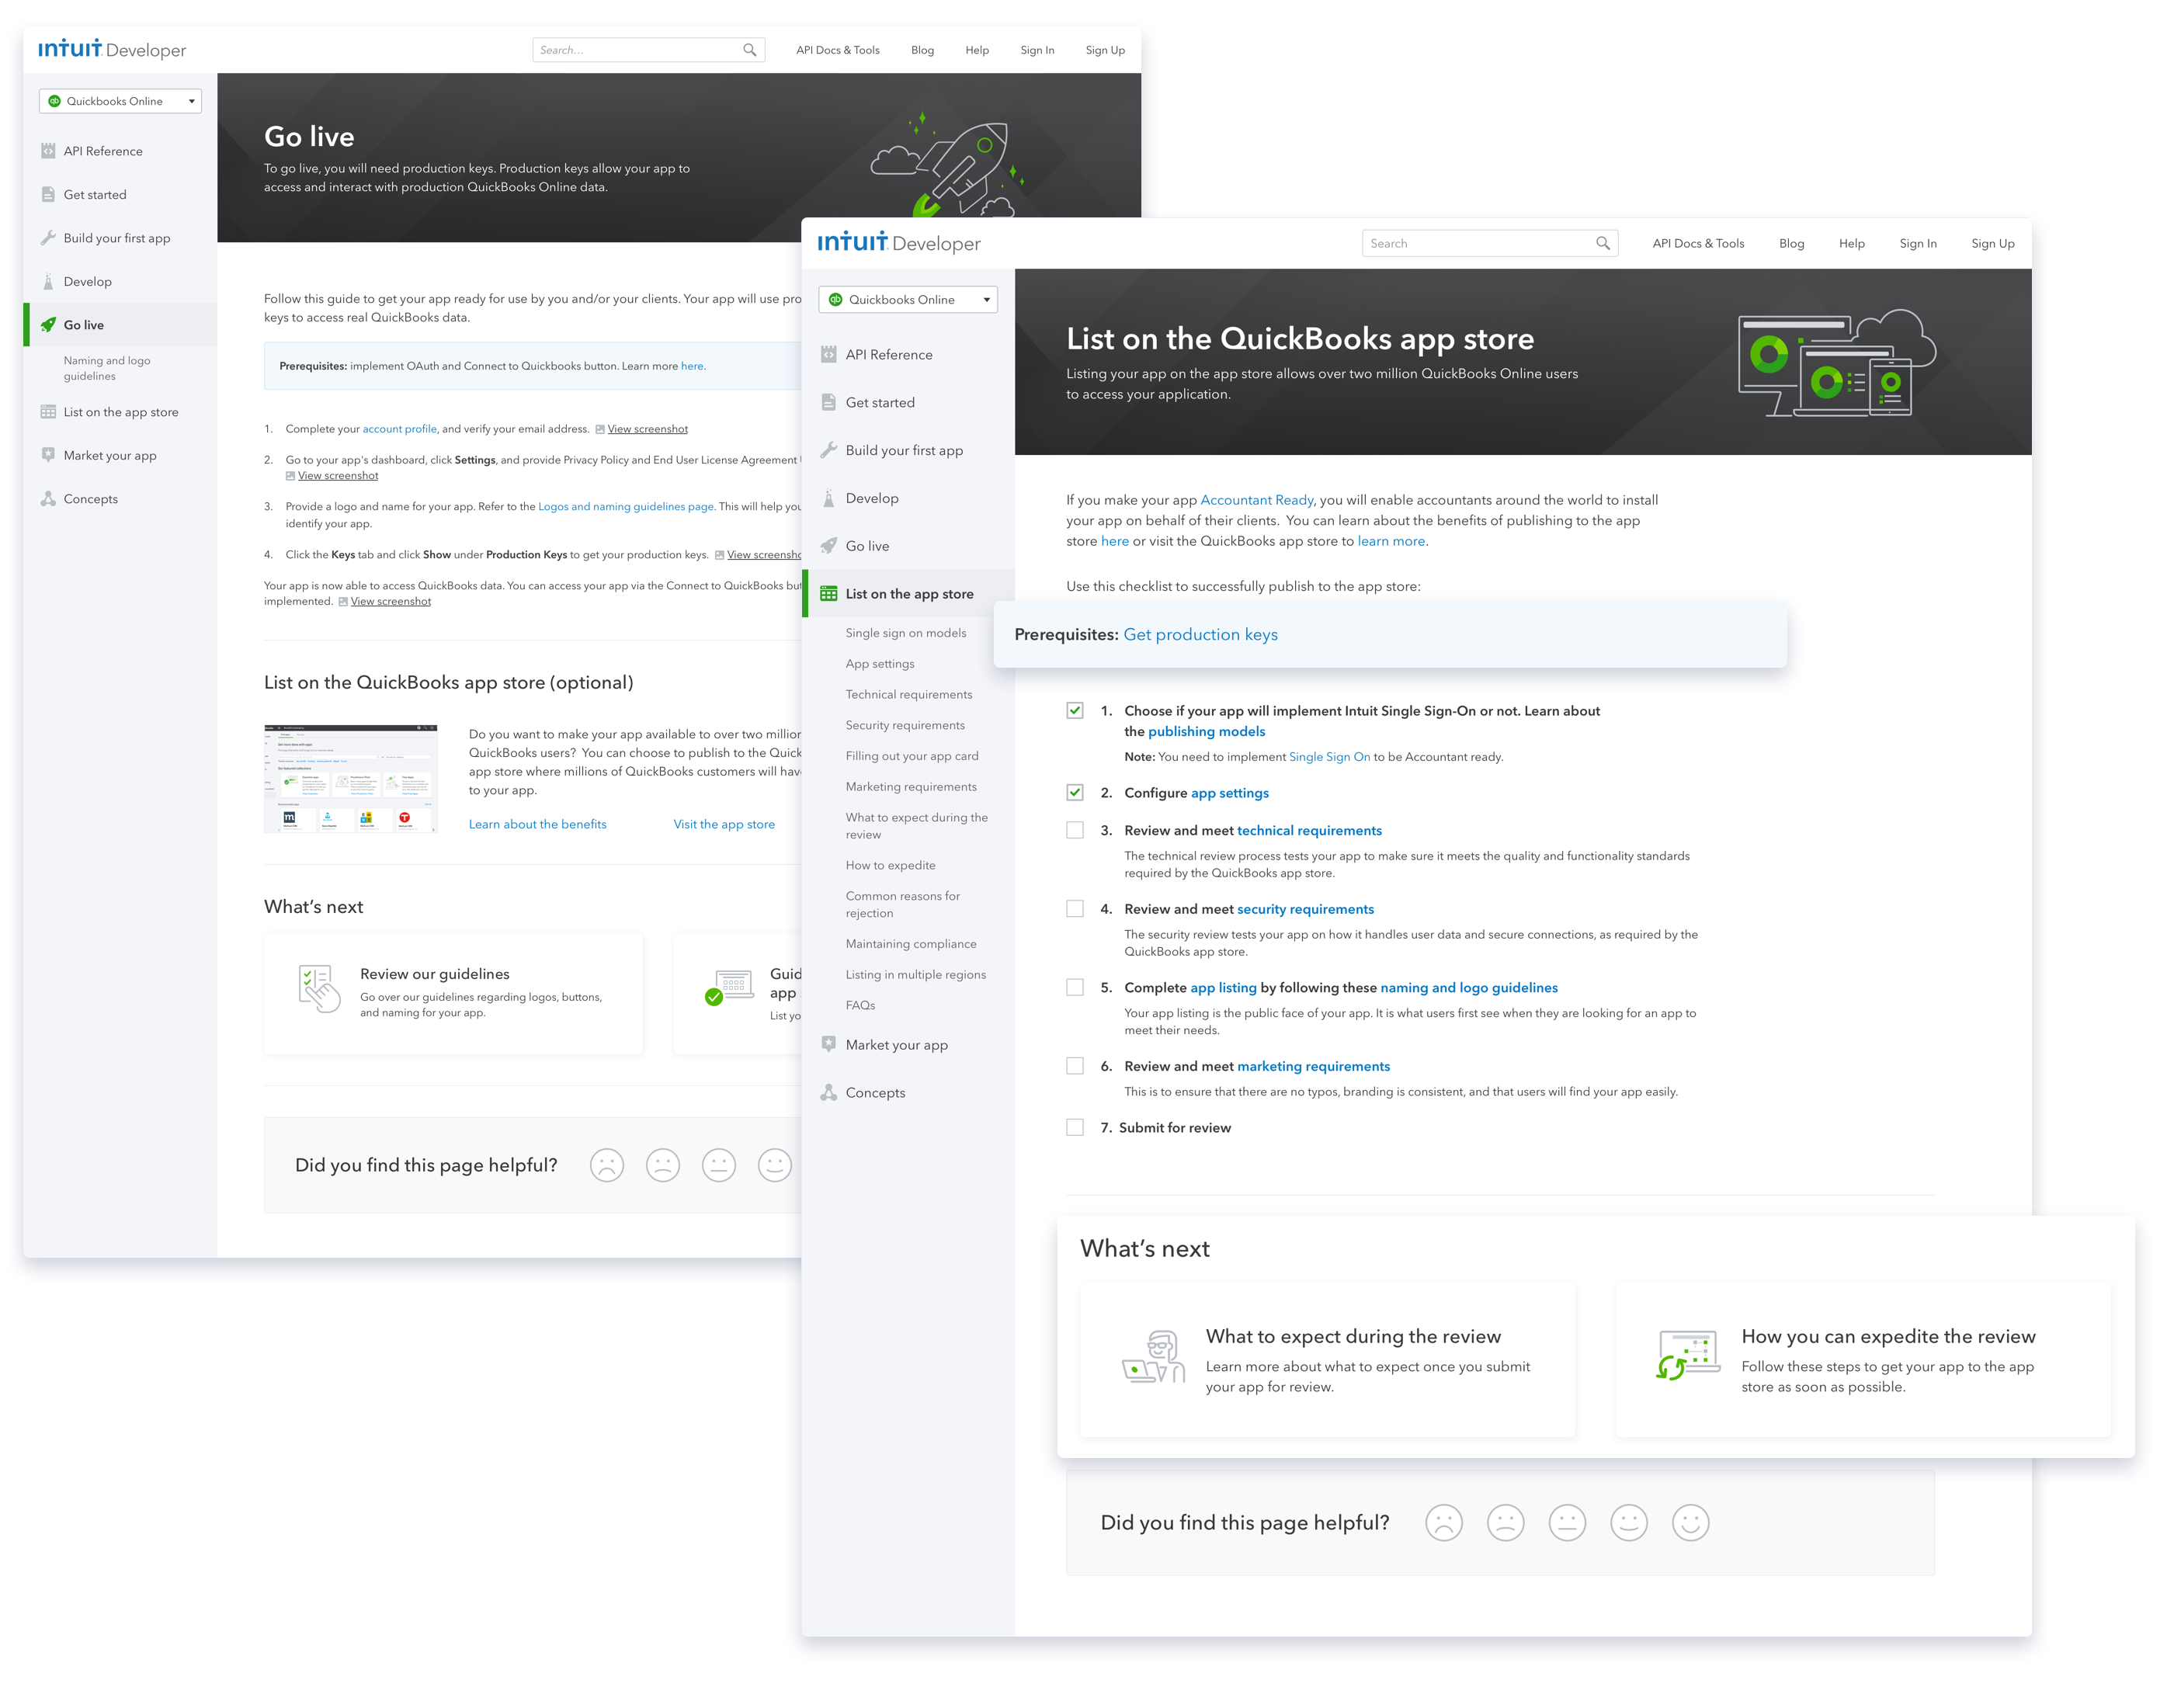 New Go-Live page and List your app on the QuickBooks store page with guidance for next step on each page